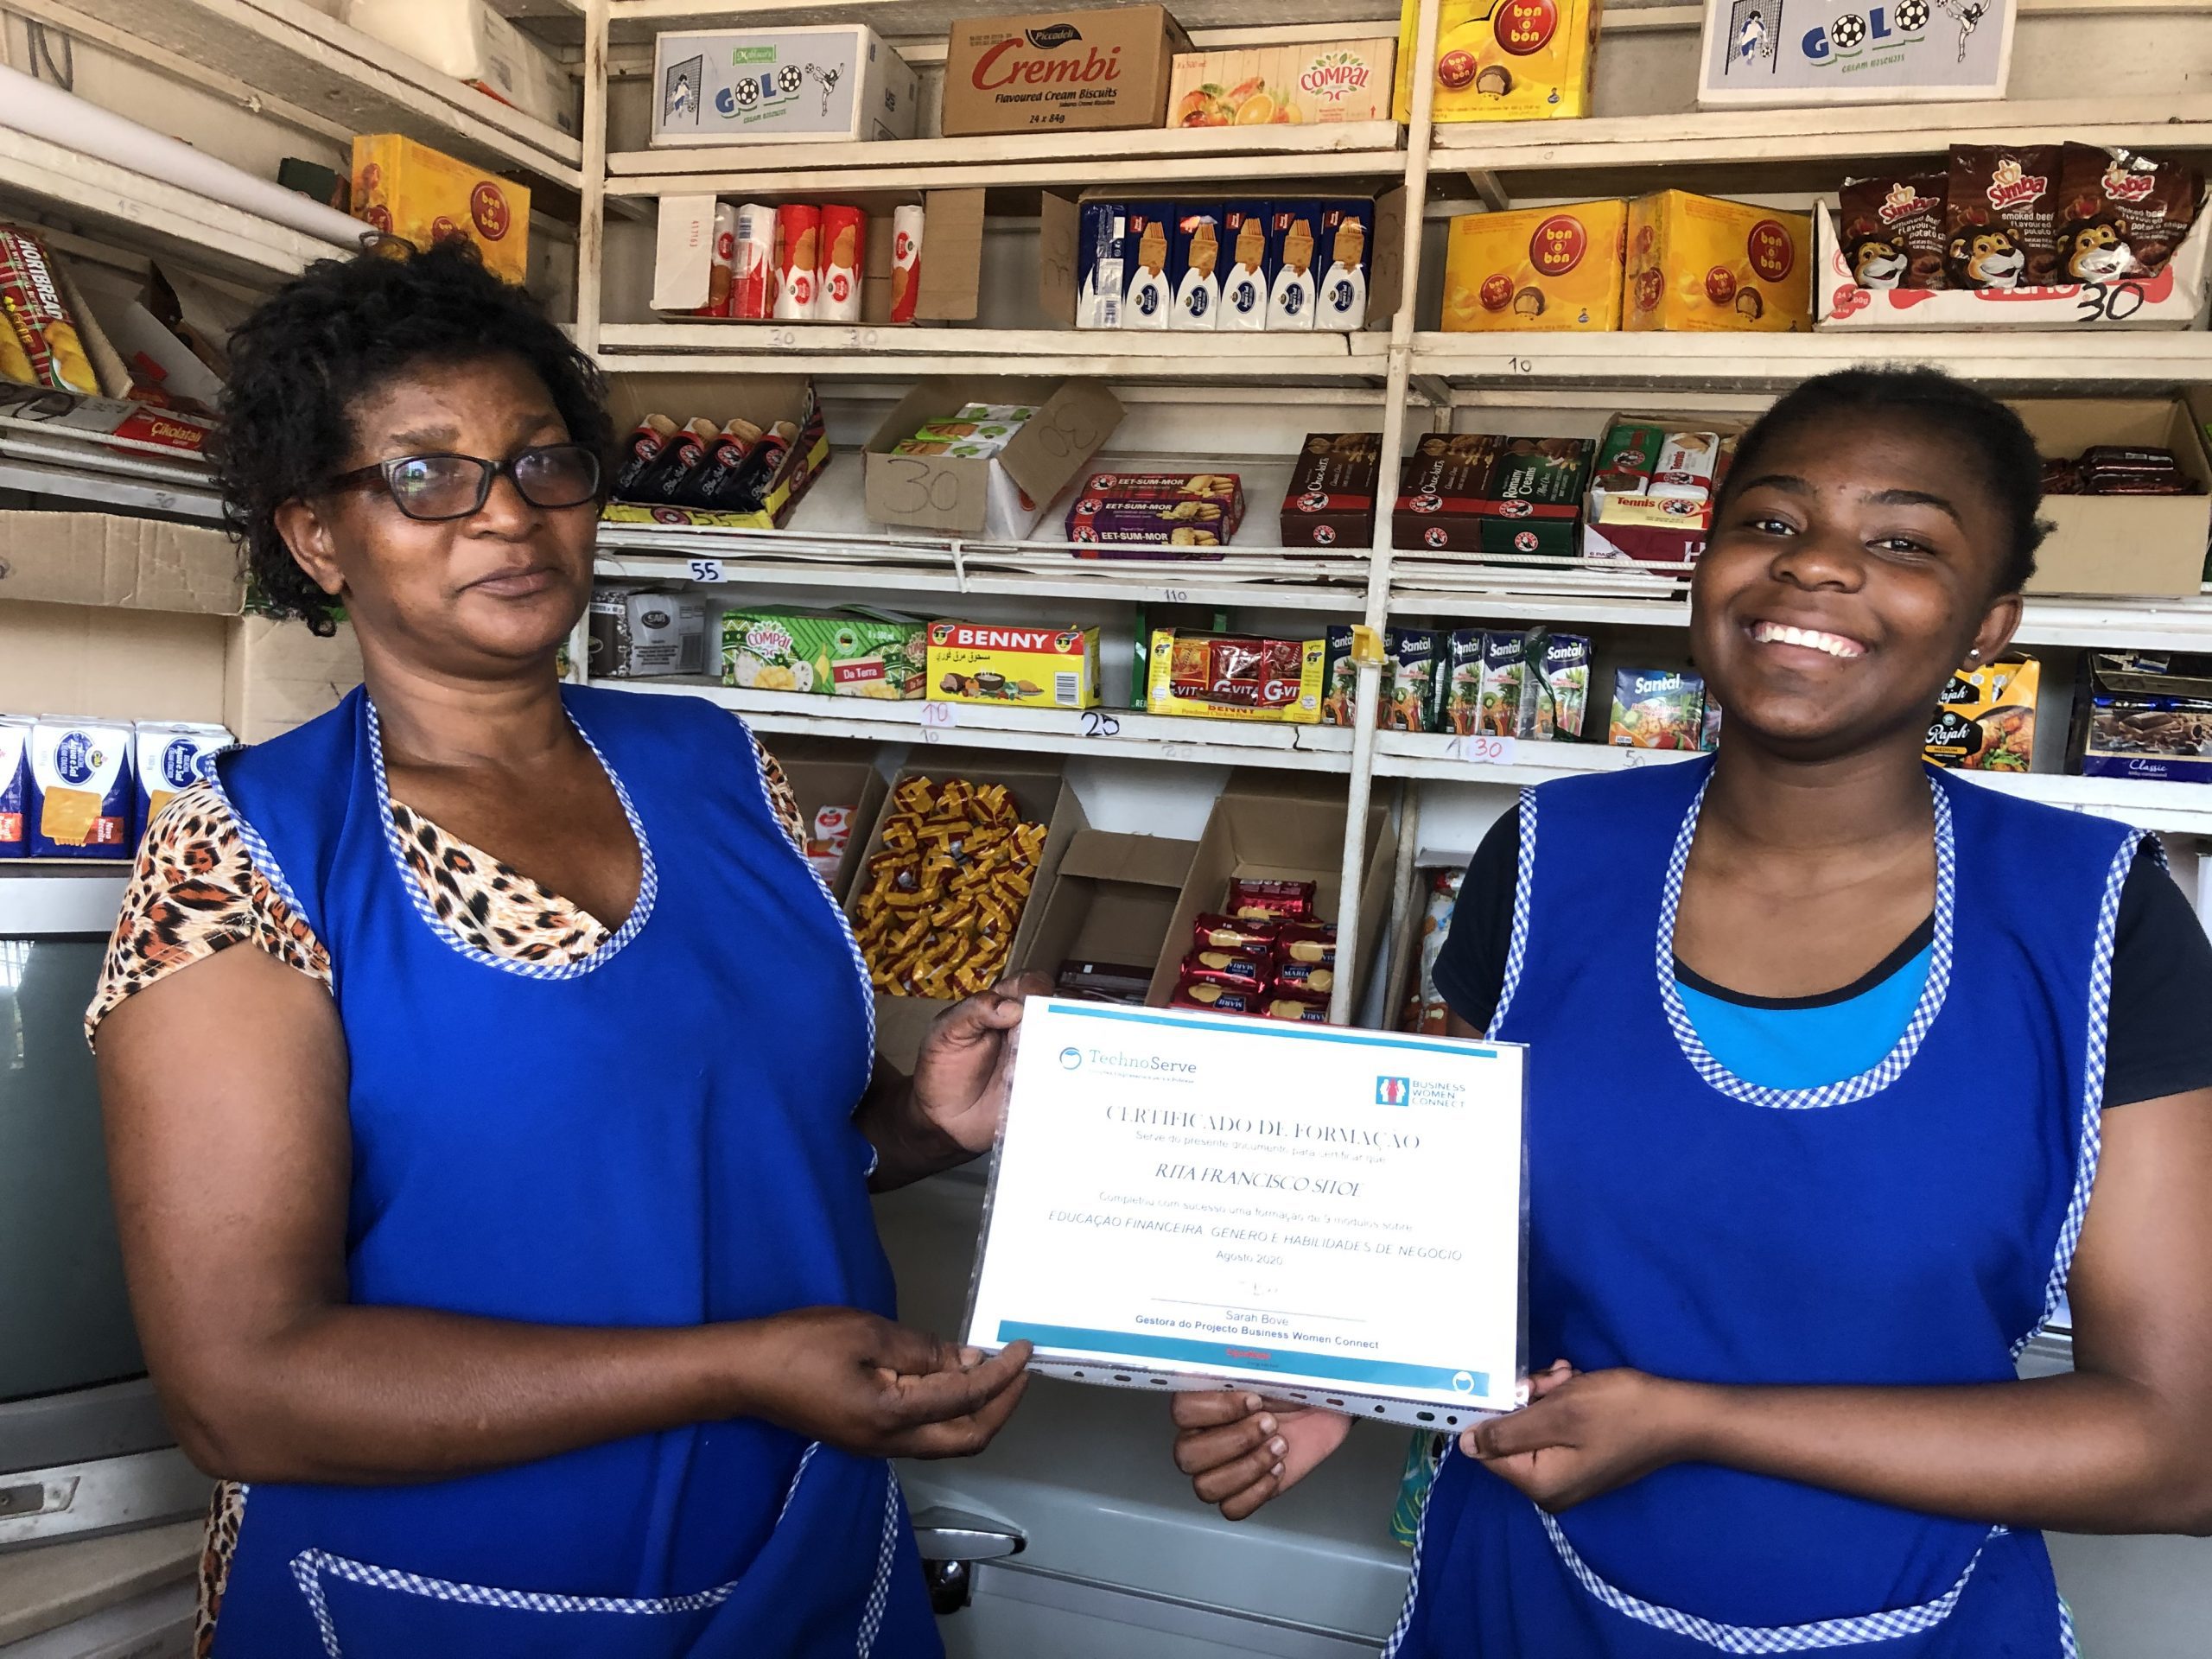 Learn how digital training gave Rita and Jessica, a mother-daughter team in Mozambique, the skills they need to keep their small business afloat during COVID-19